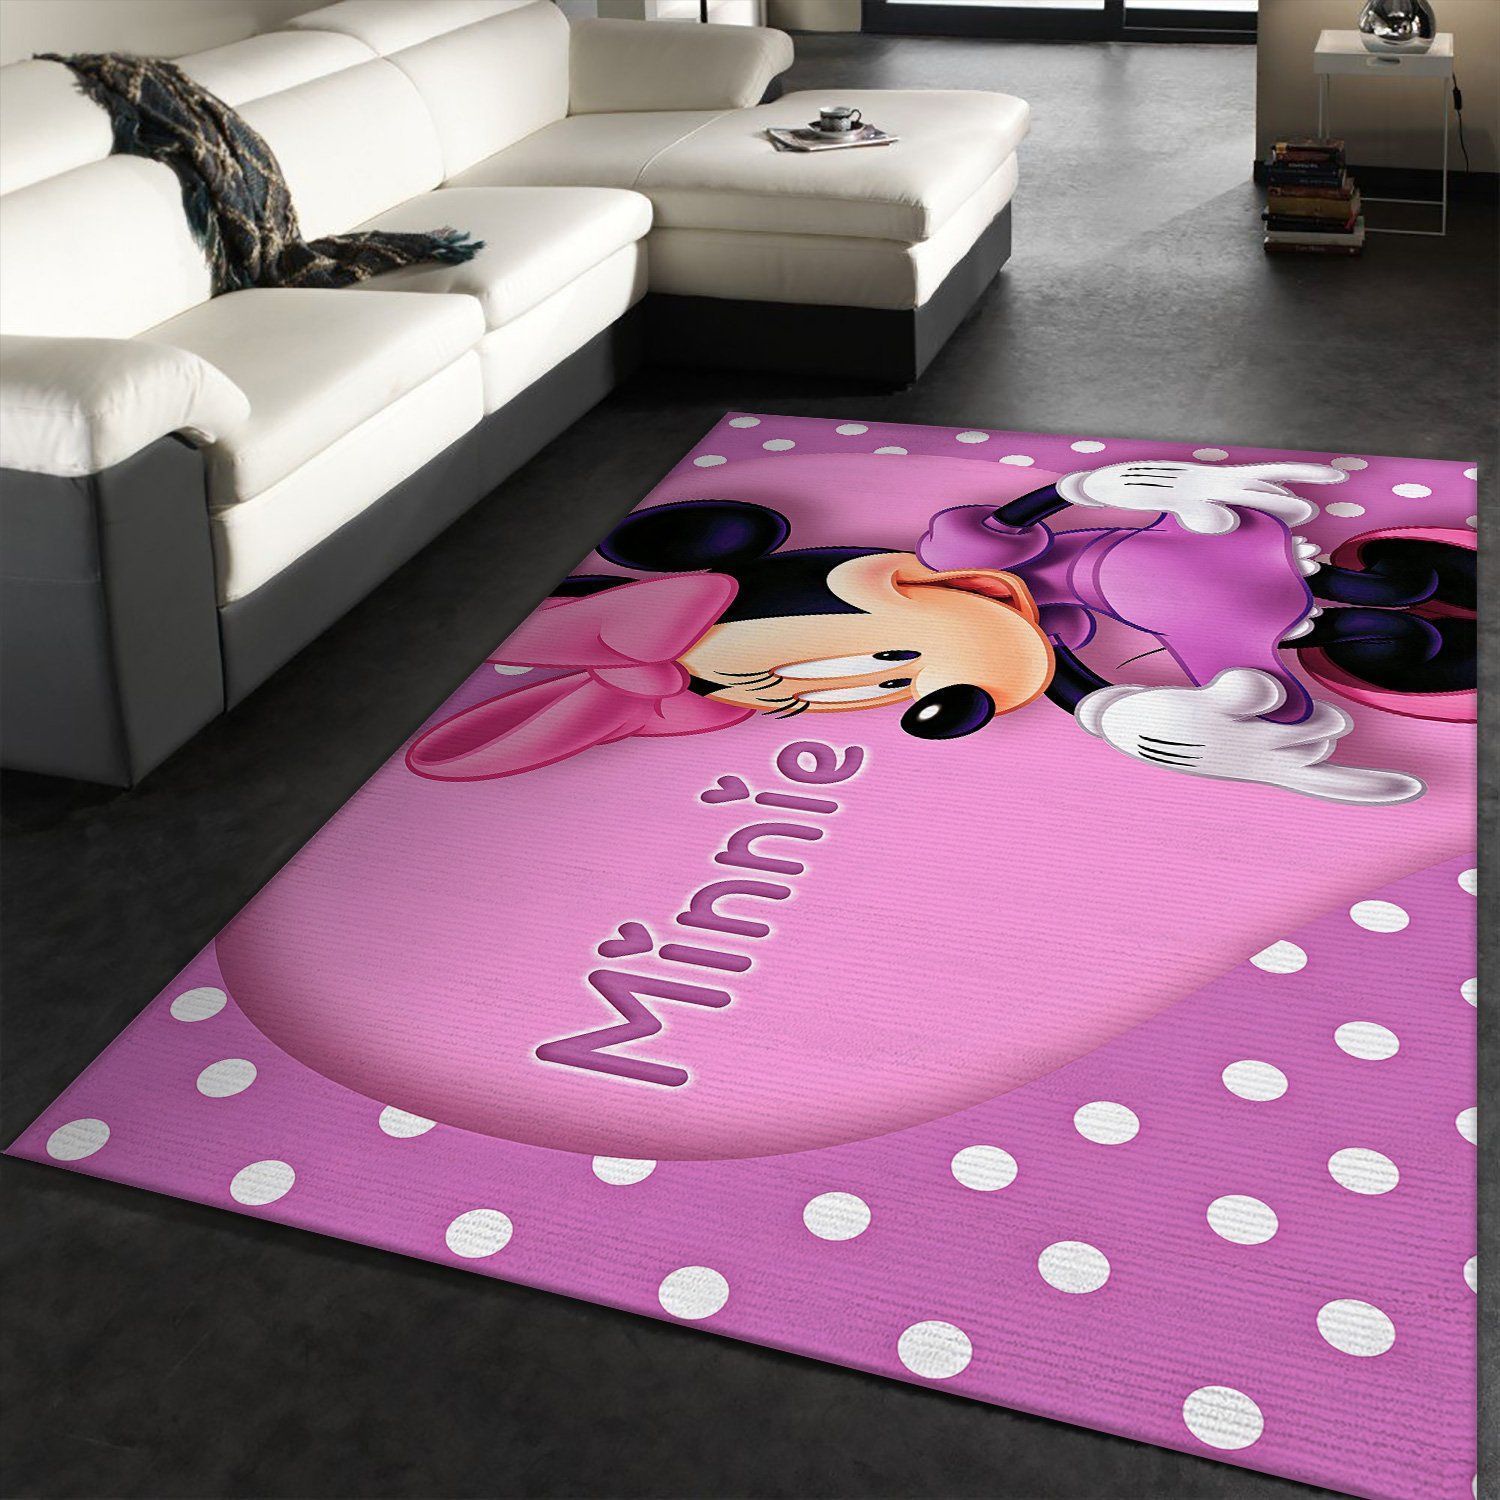 Minnie Mouse Area Rugs Disney Movies Living Room Carpet FN121207 Local Brands Floor Decor The US Decor - Indoor Outdoor Rugs 1